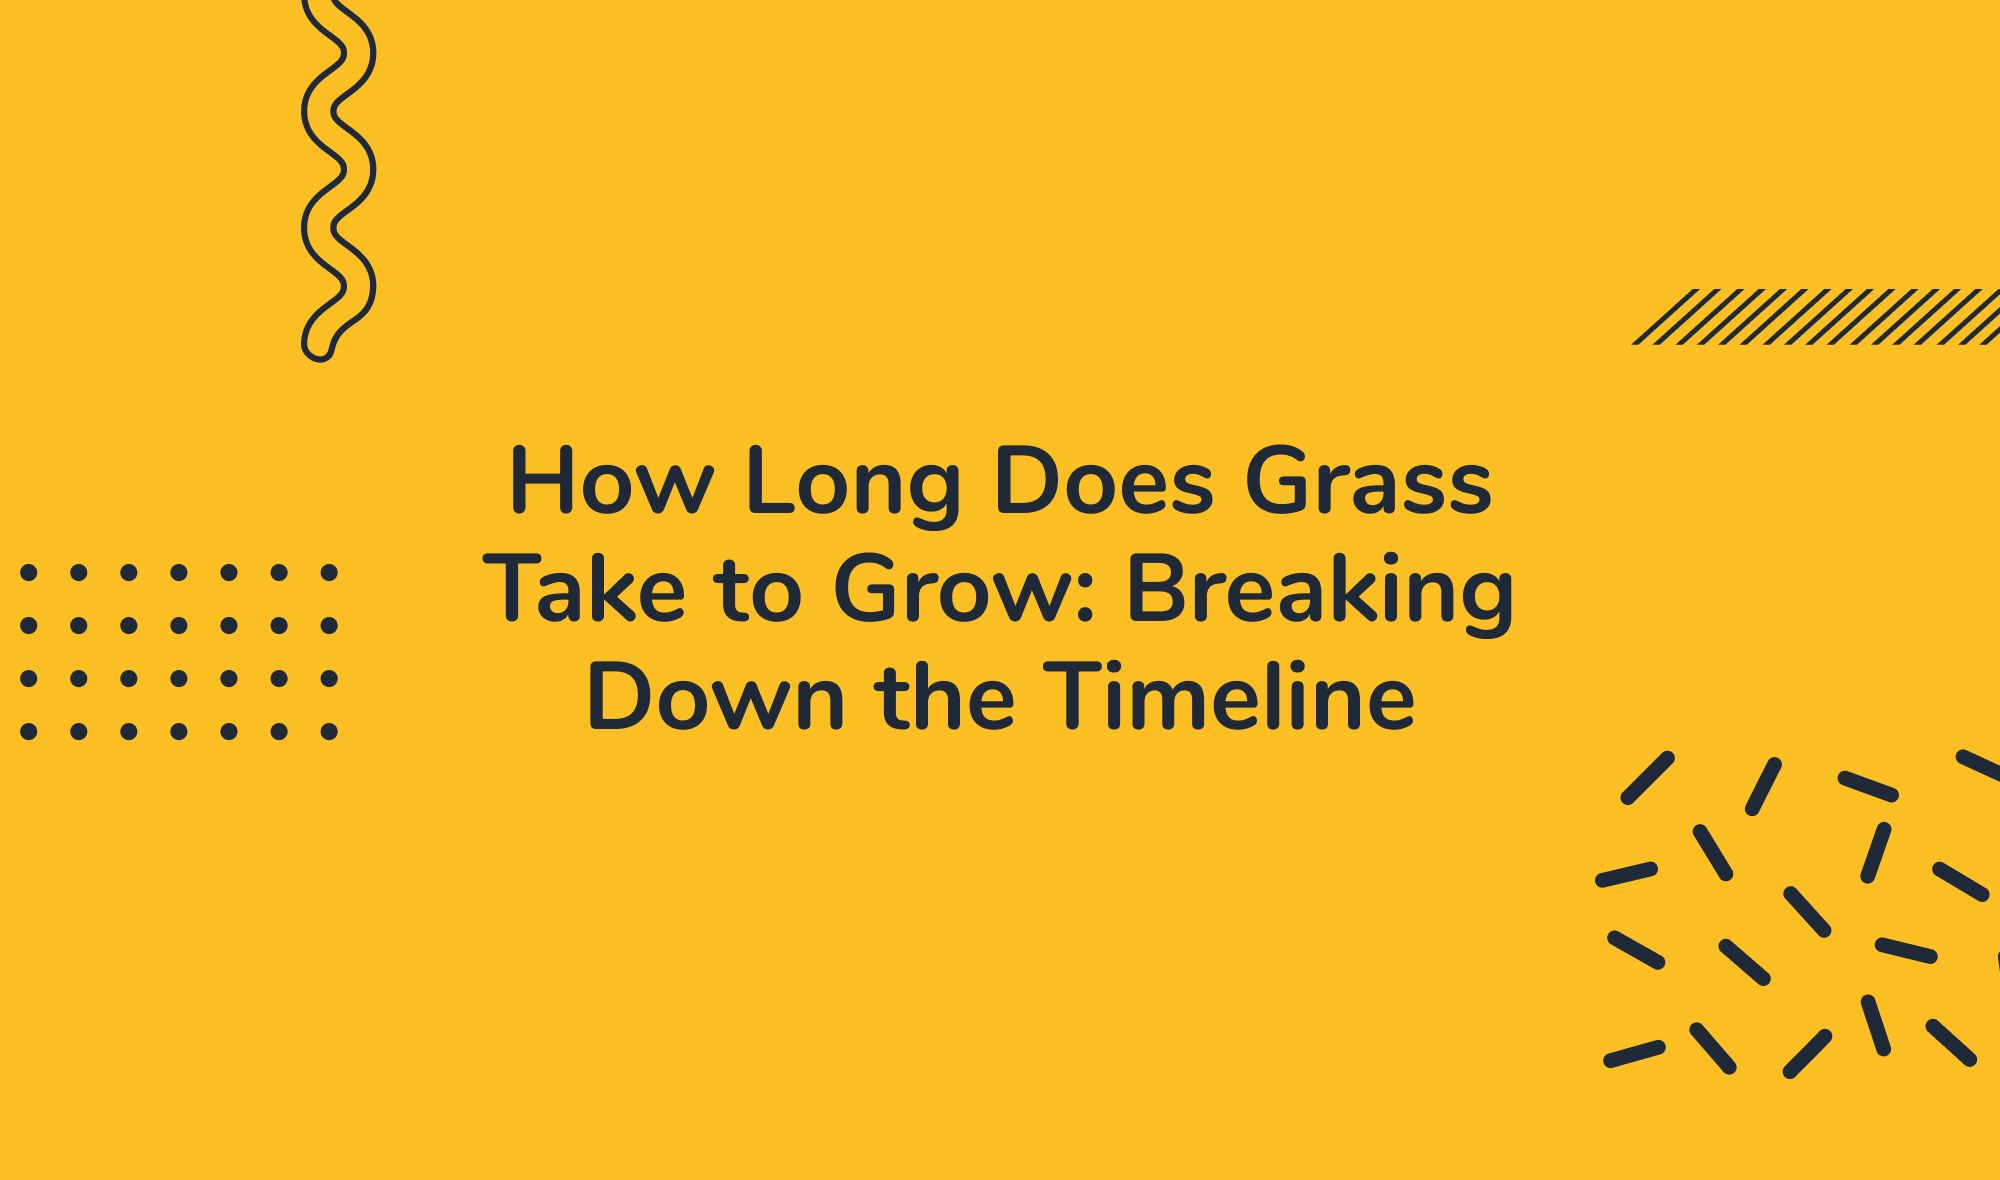 How Long Does Grass Take to Grow: Breaking Down the Timeline